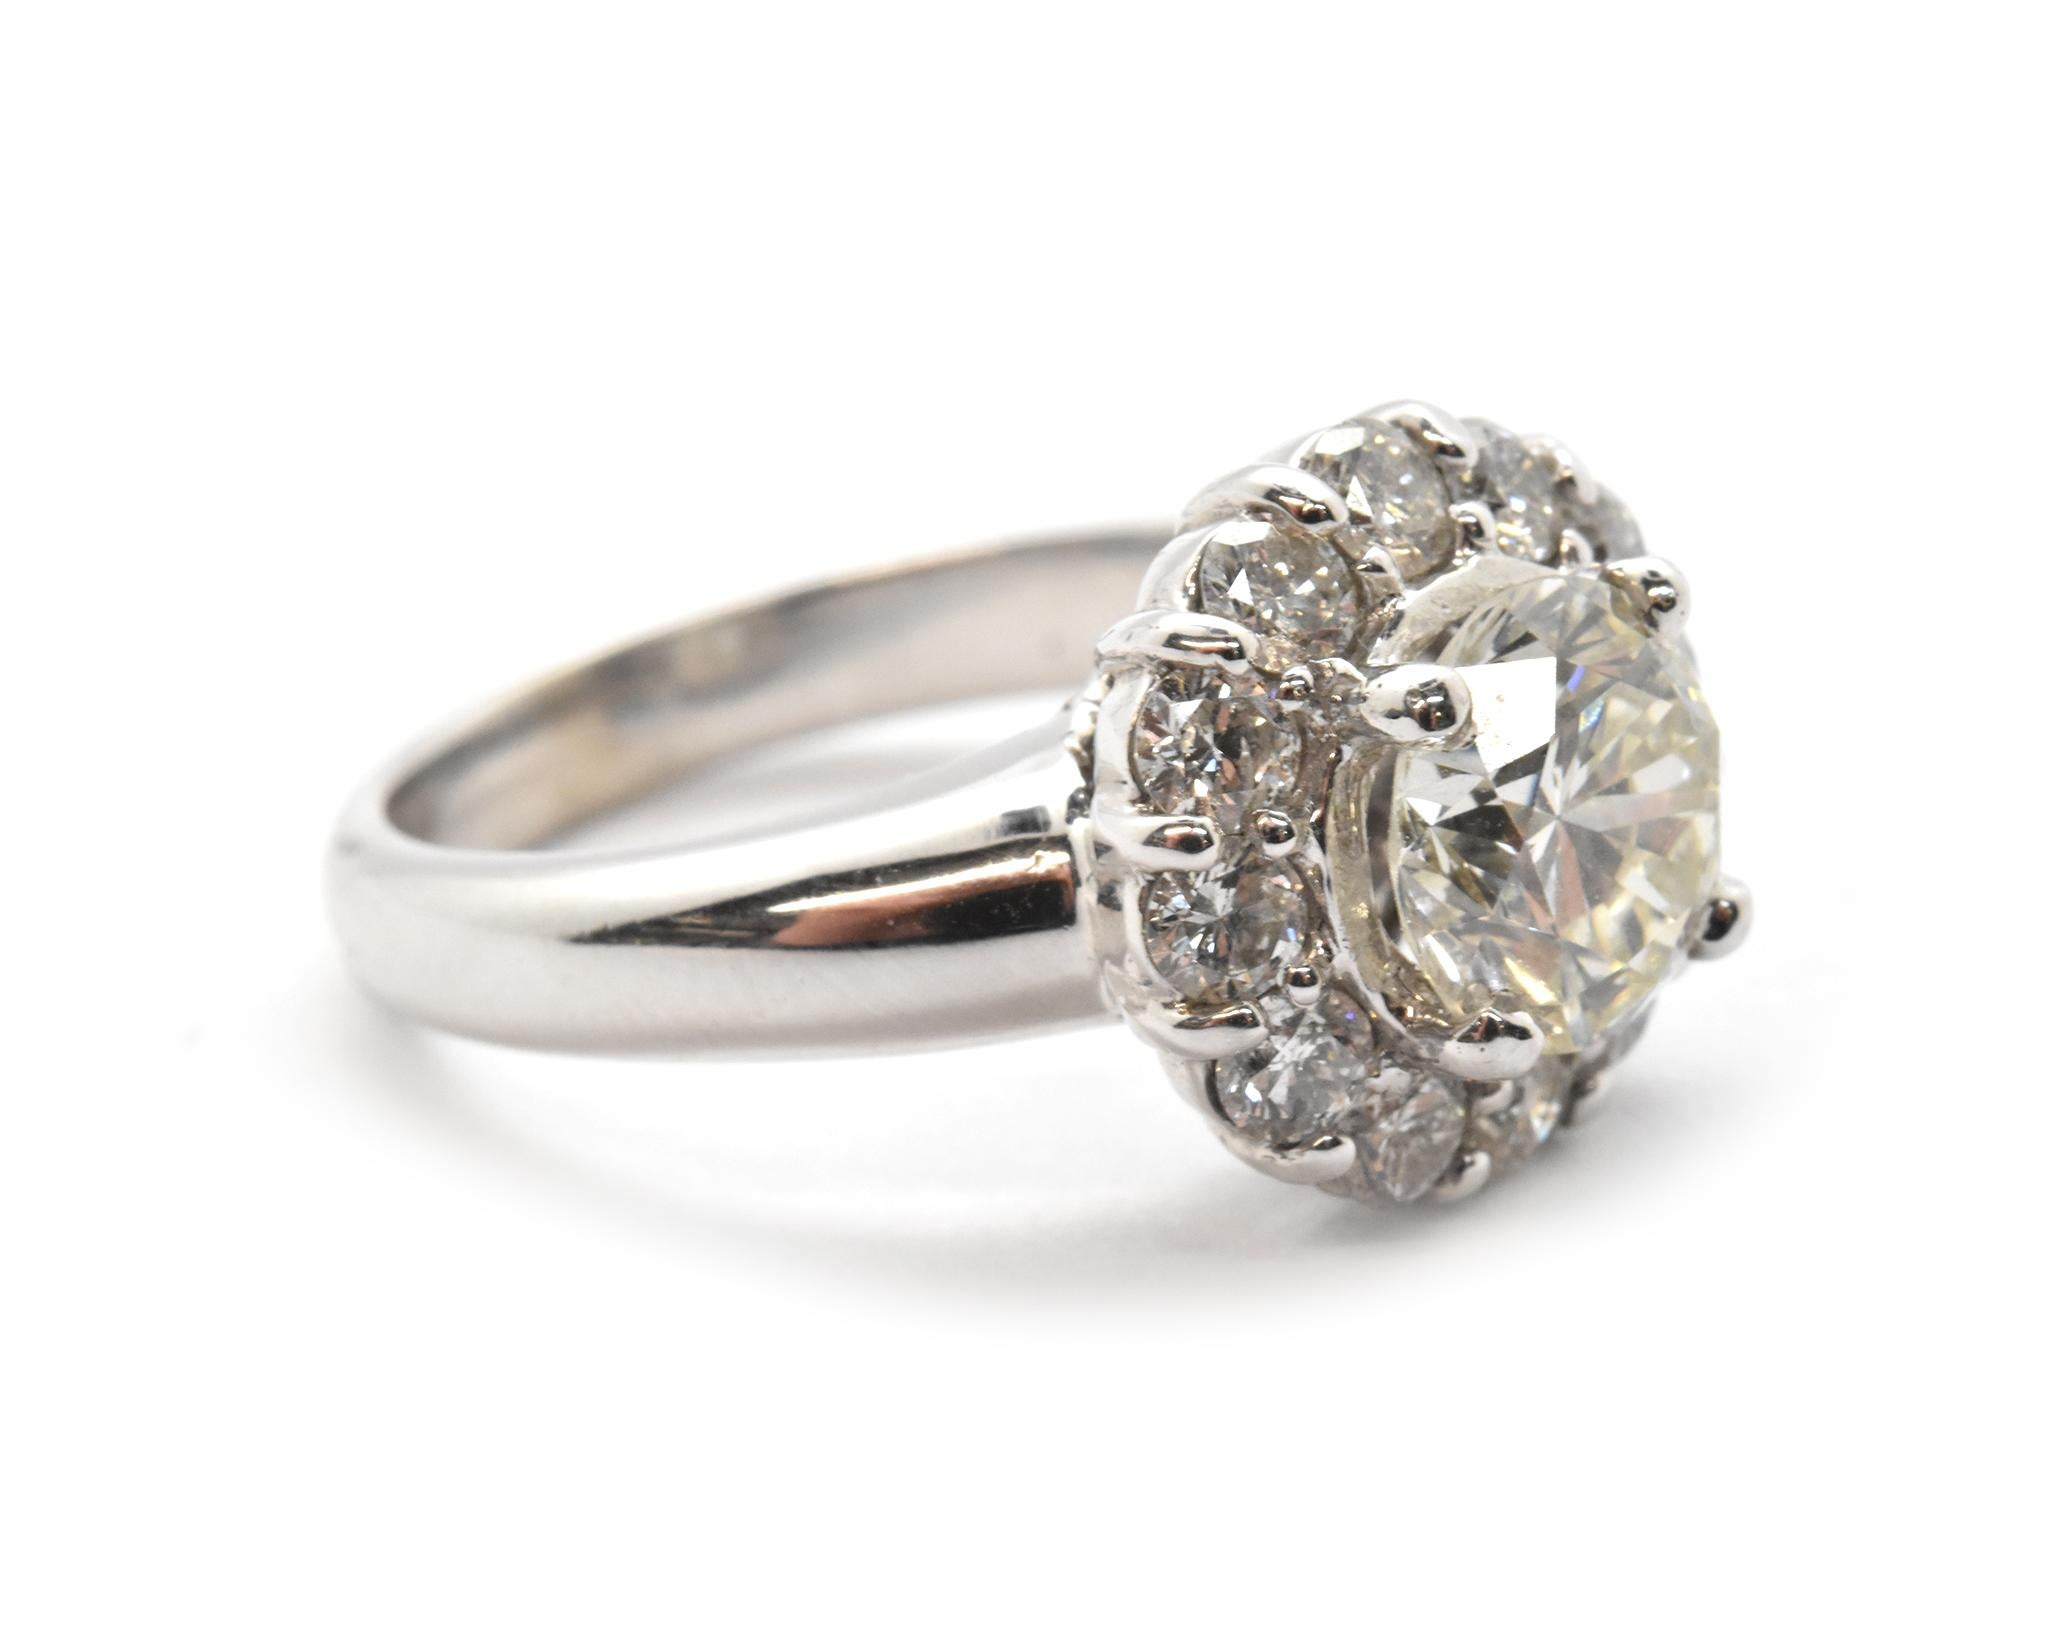 This gorgeous ring features a 1.76ct round brilliant diamond set into the center of a diamond halo. The center diamond is graded L in color and VS1 in clarity. The halo diamonds have an additional weight of 0.99cttw. The ring measures 13mm wide, and